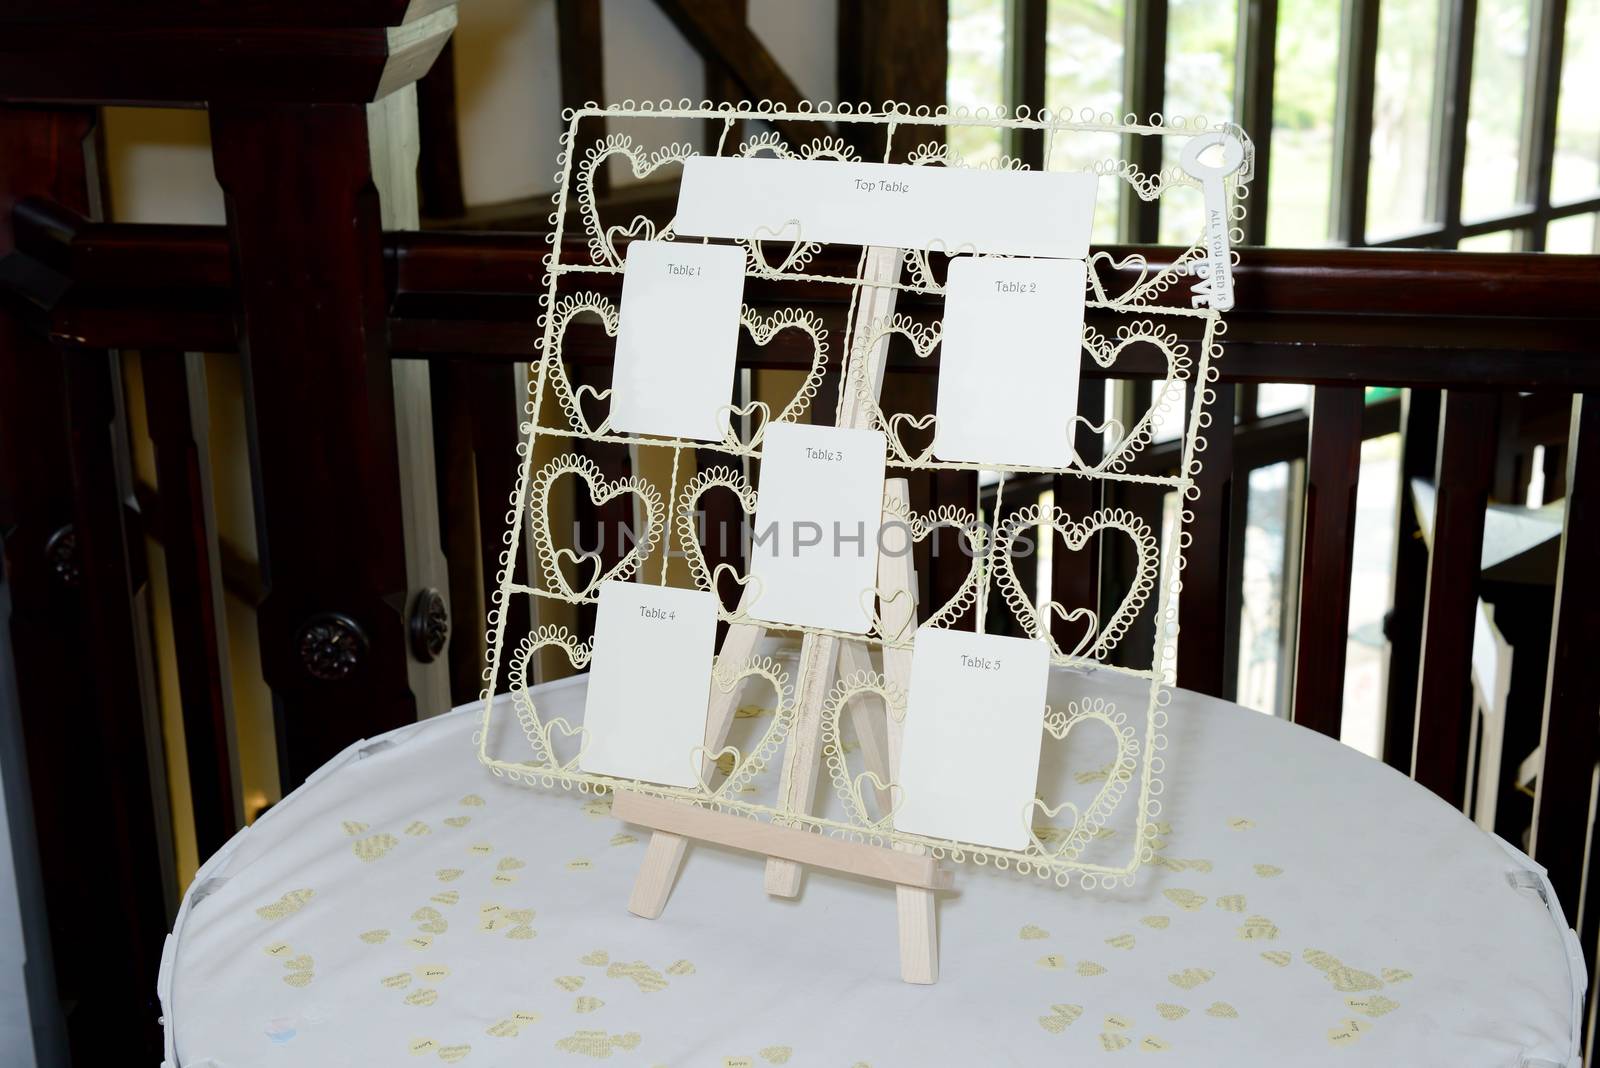 Wedding reception seating plan closeup on table with decoration